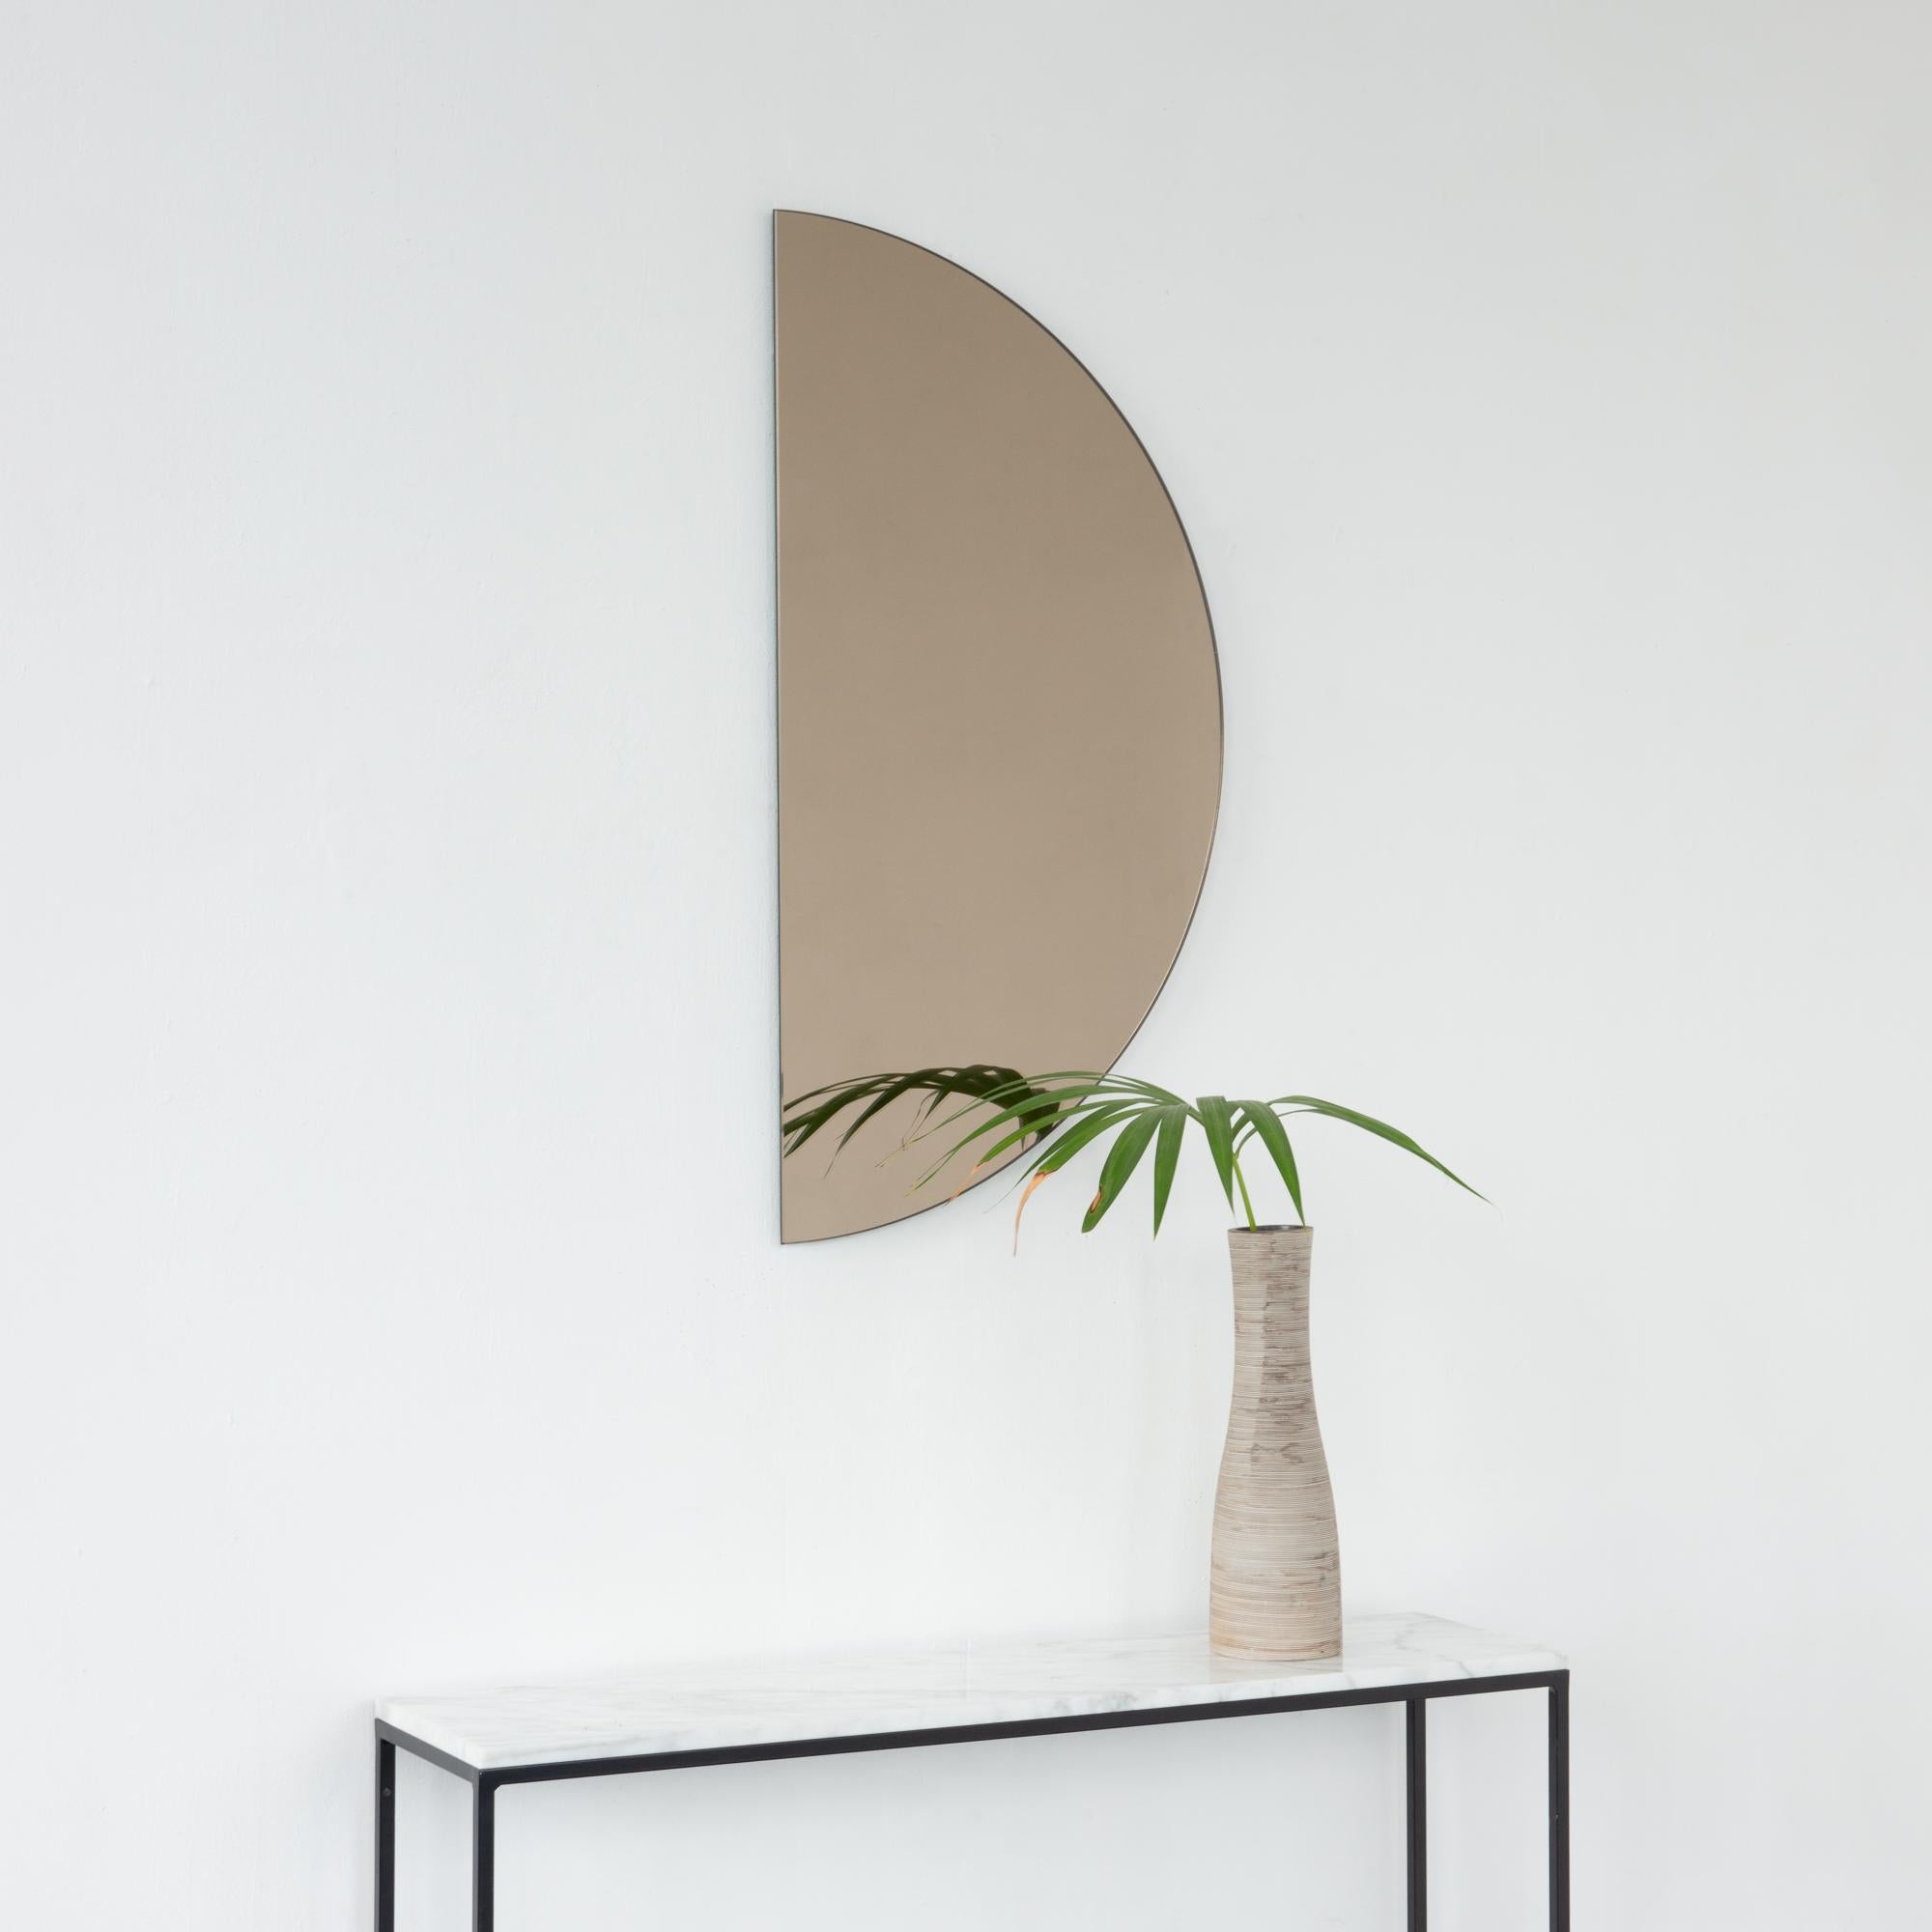 Minimalist half-moon Luna™ bronze tinted frameless mirror with a floating effect. Fitted with a quality and ingenious hanging system for a flexible installation in 4 different directions. Designed and made in London, UK. 

Our mirrors